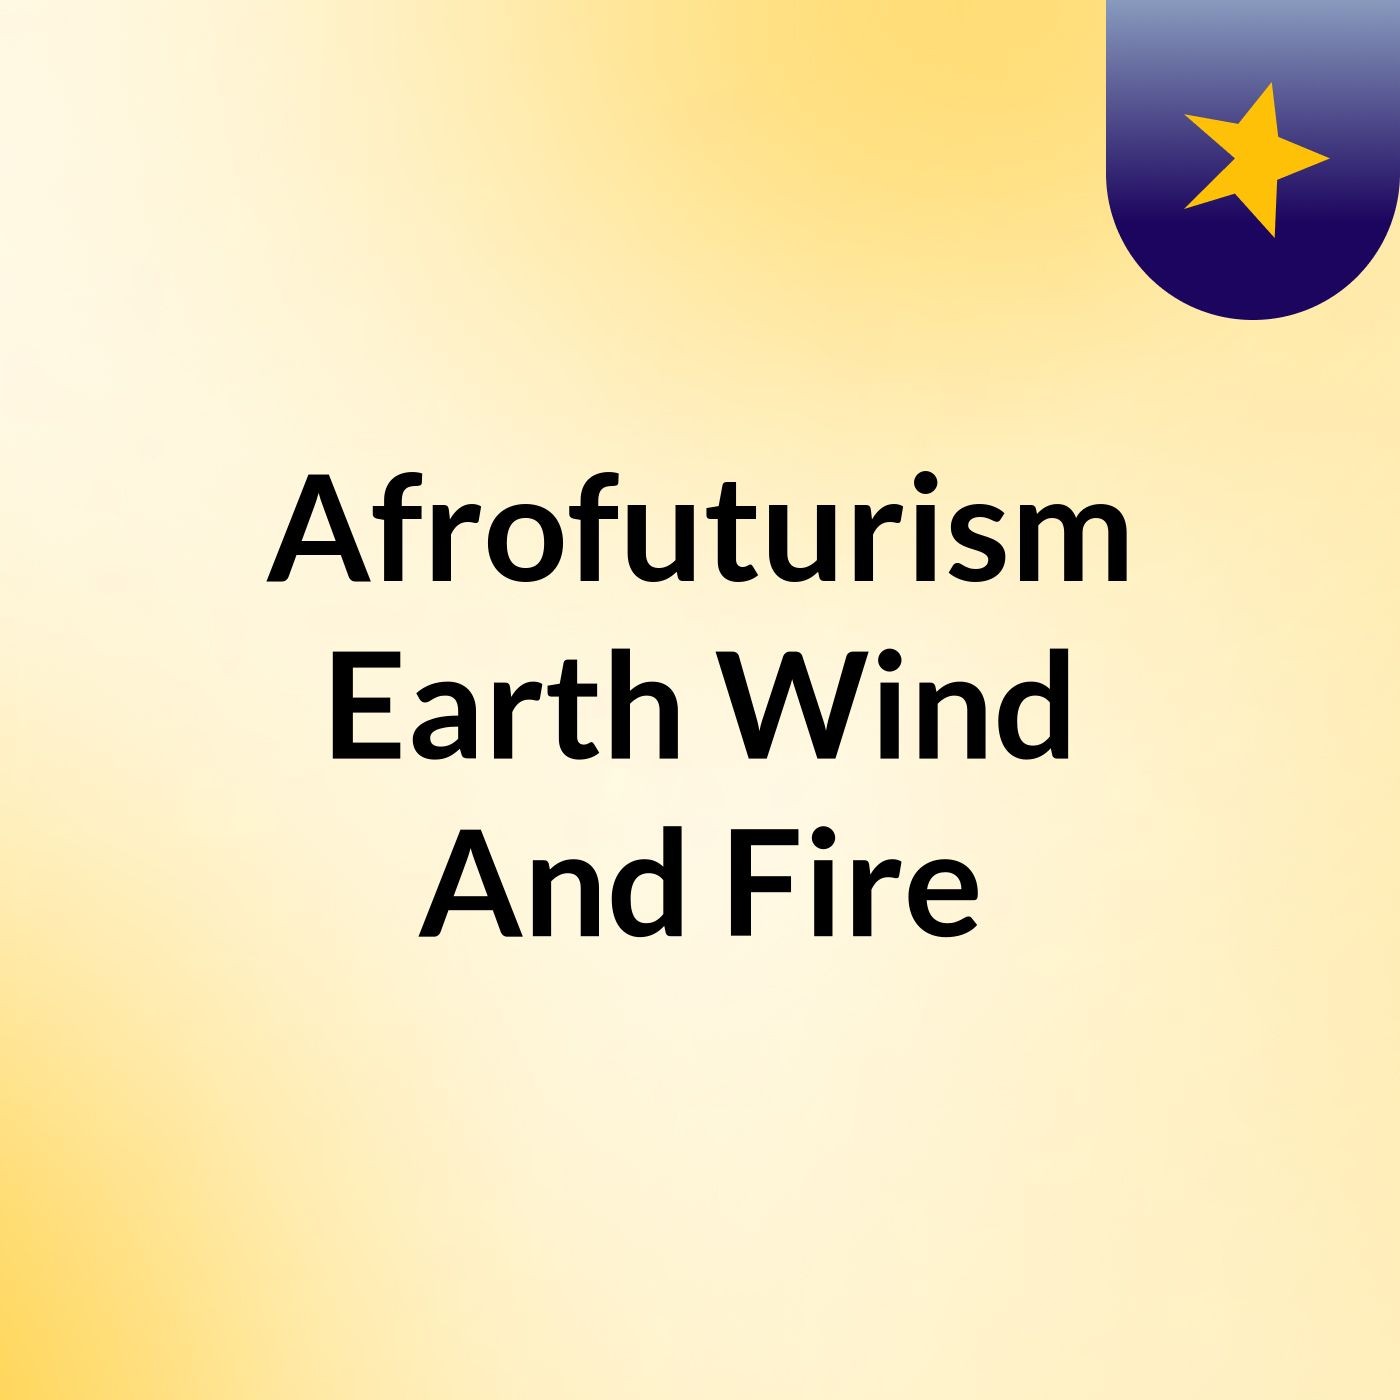 Afrofuturism Earth Wind And Fire